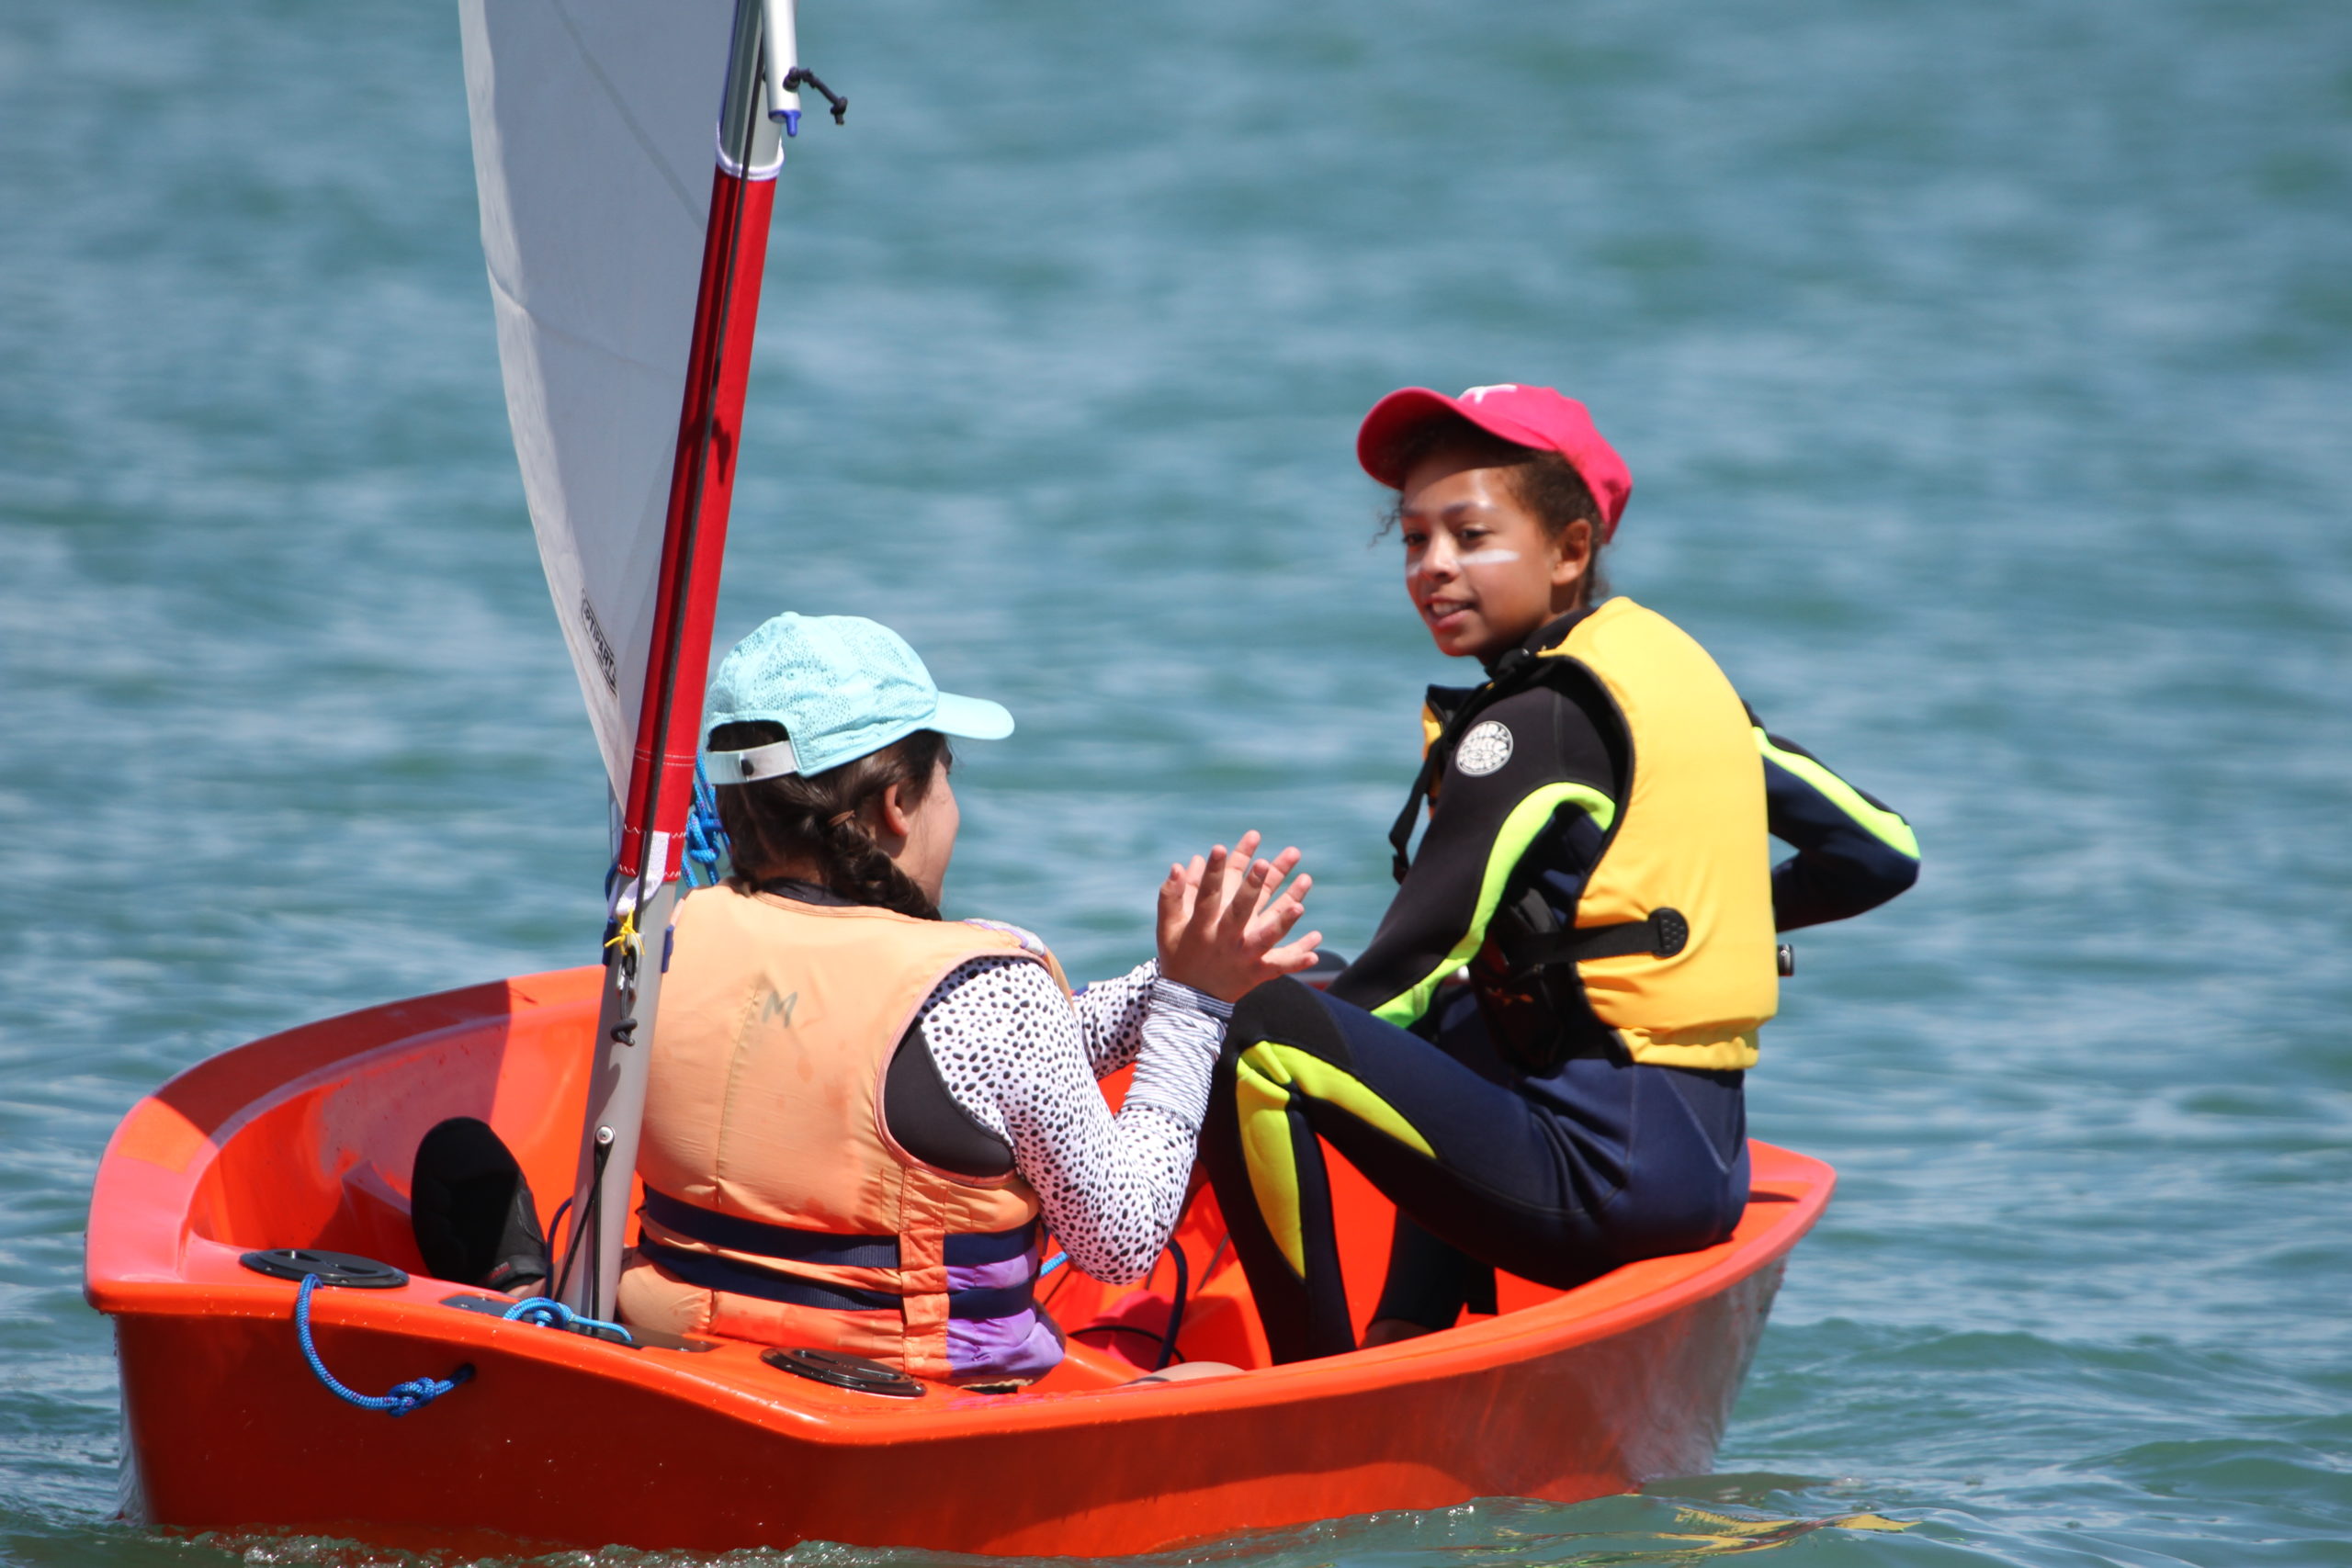 learning to sail in a plastic optimist